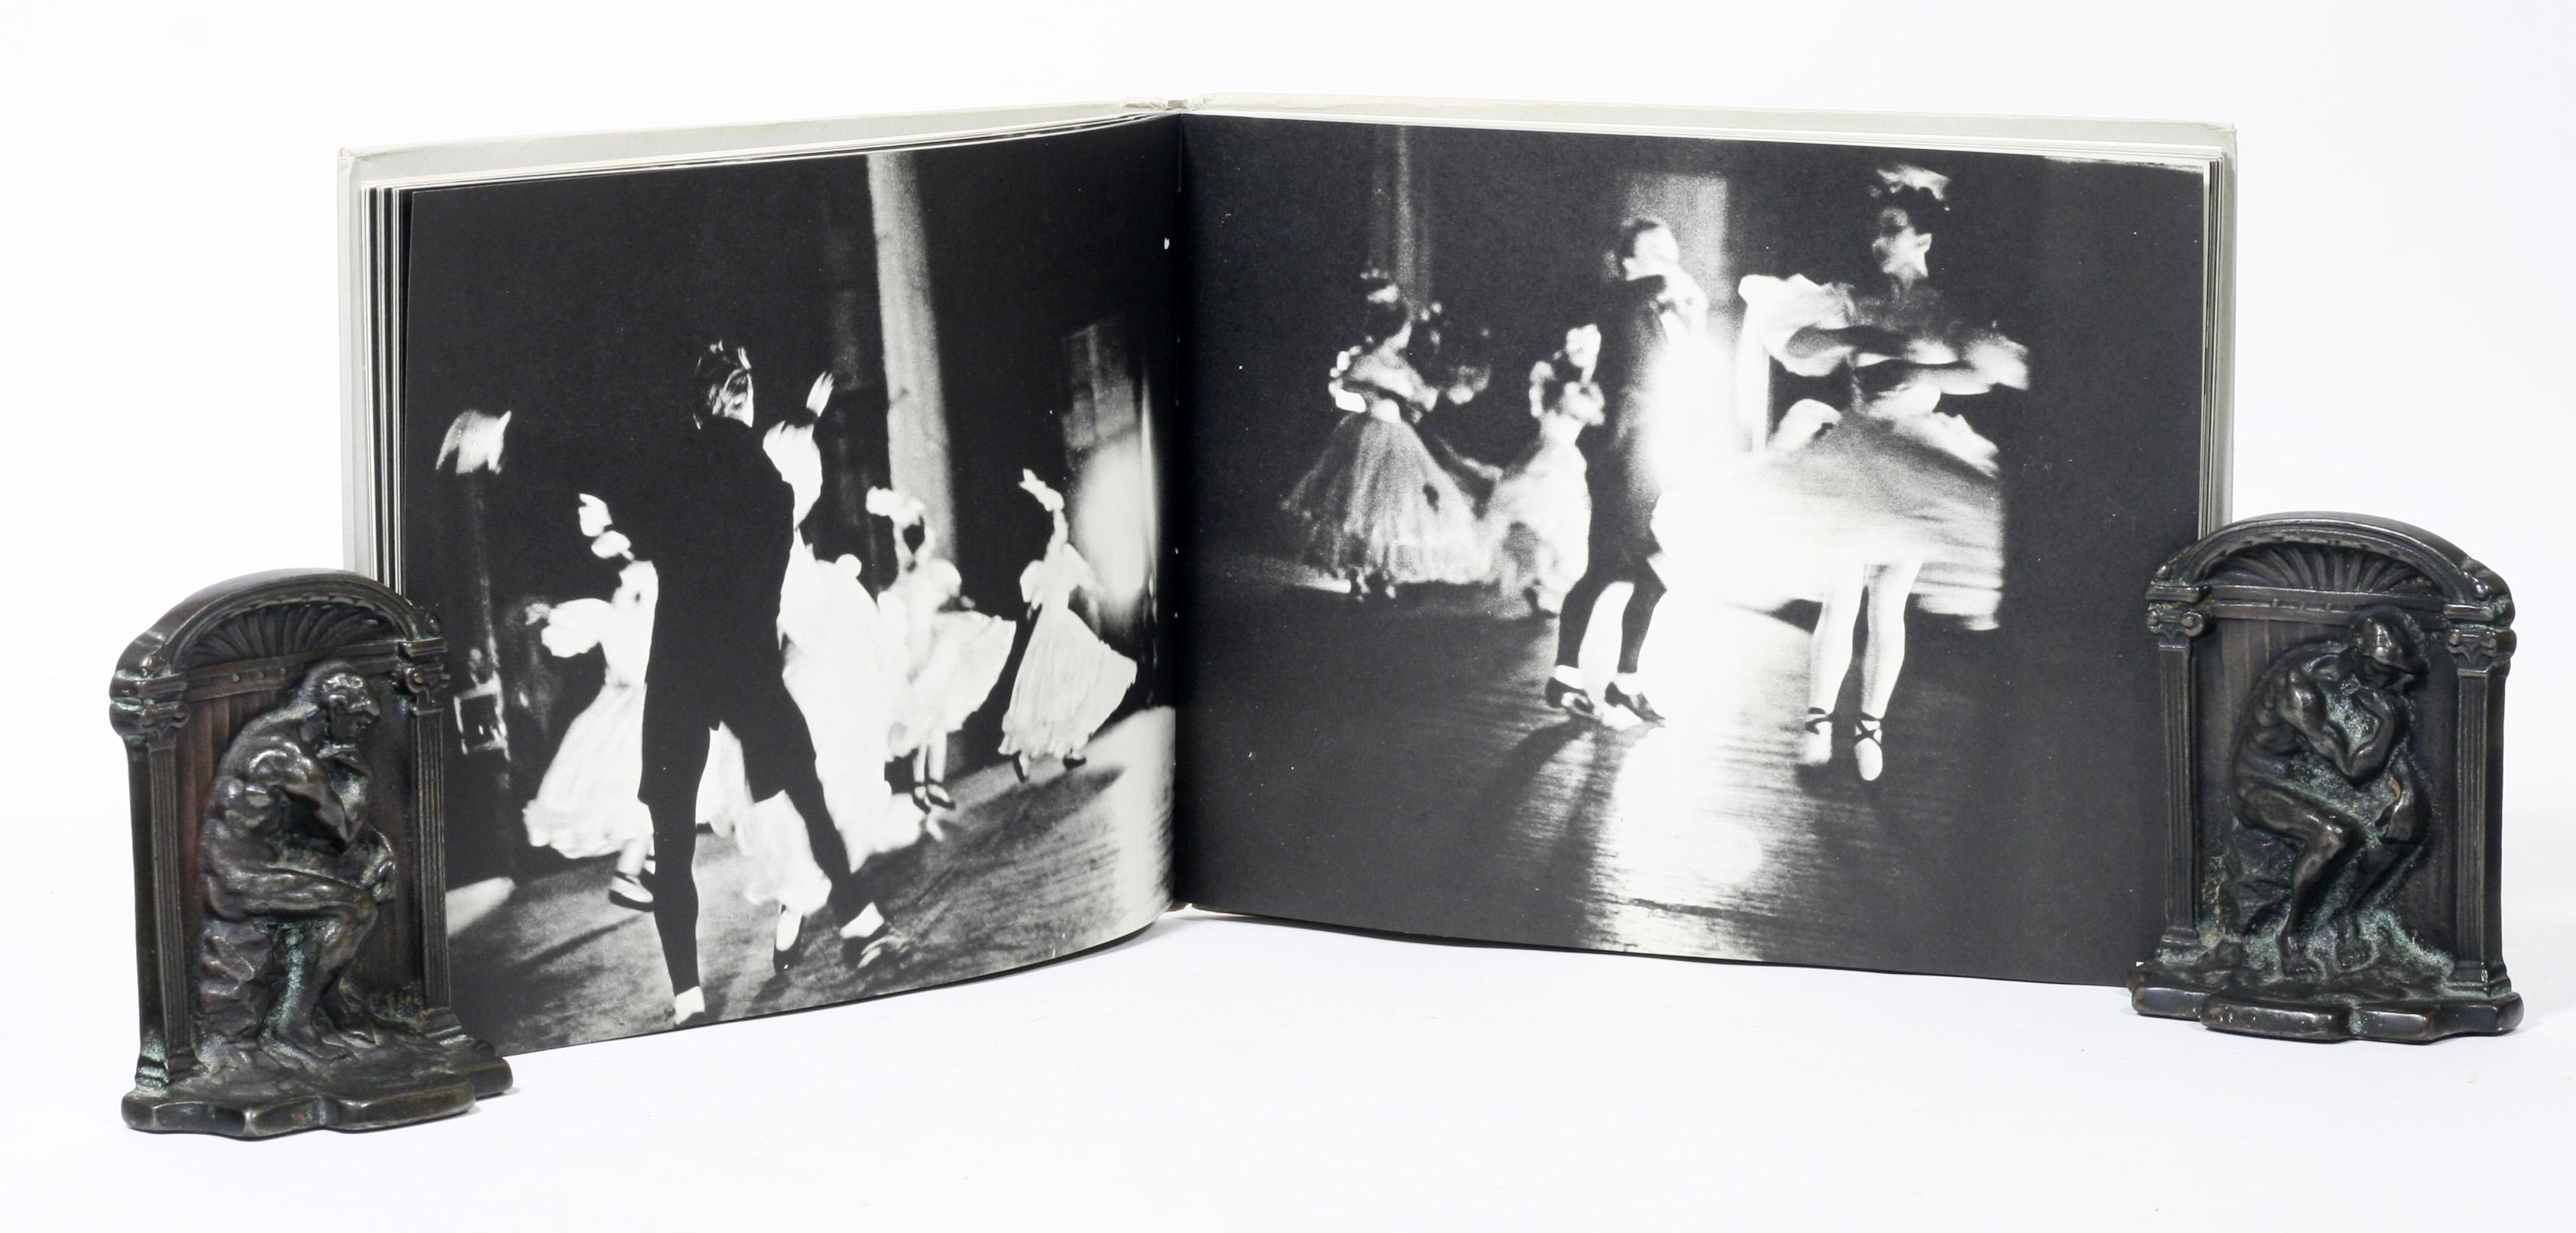 Mid-20th Century Alexey Brodovitch - Ballet - First Edition Photography Book